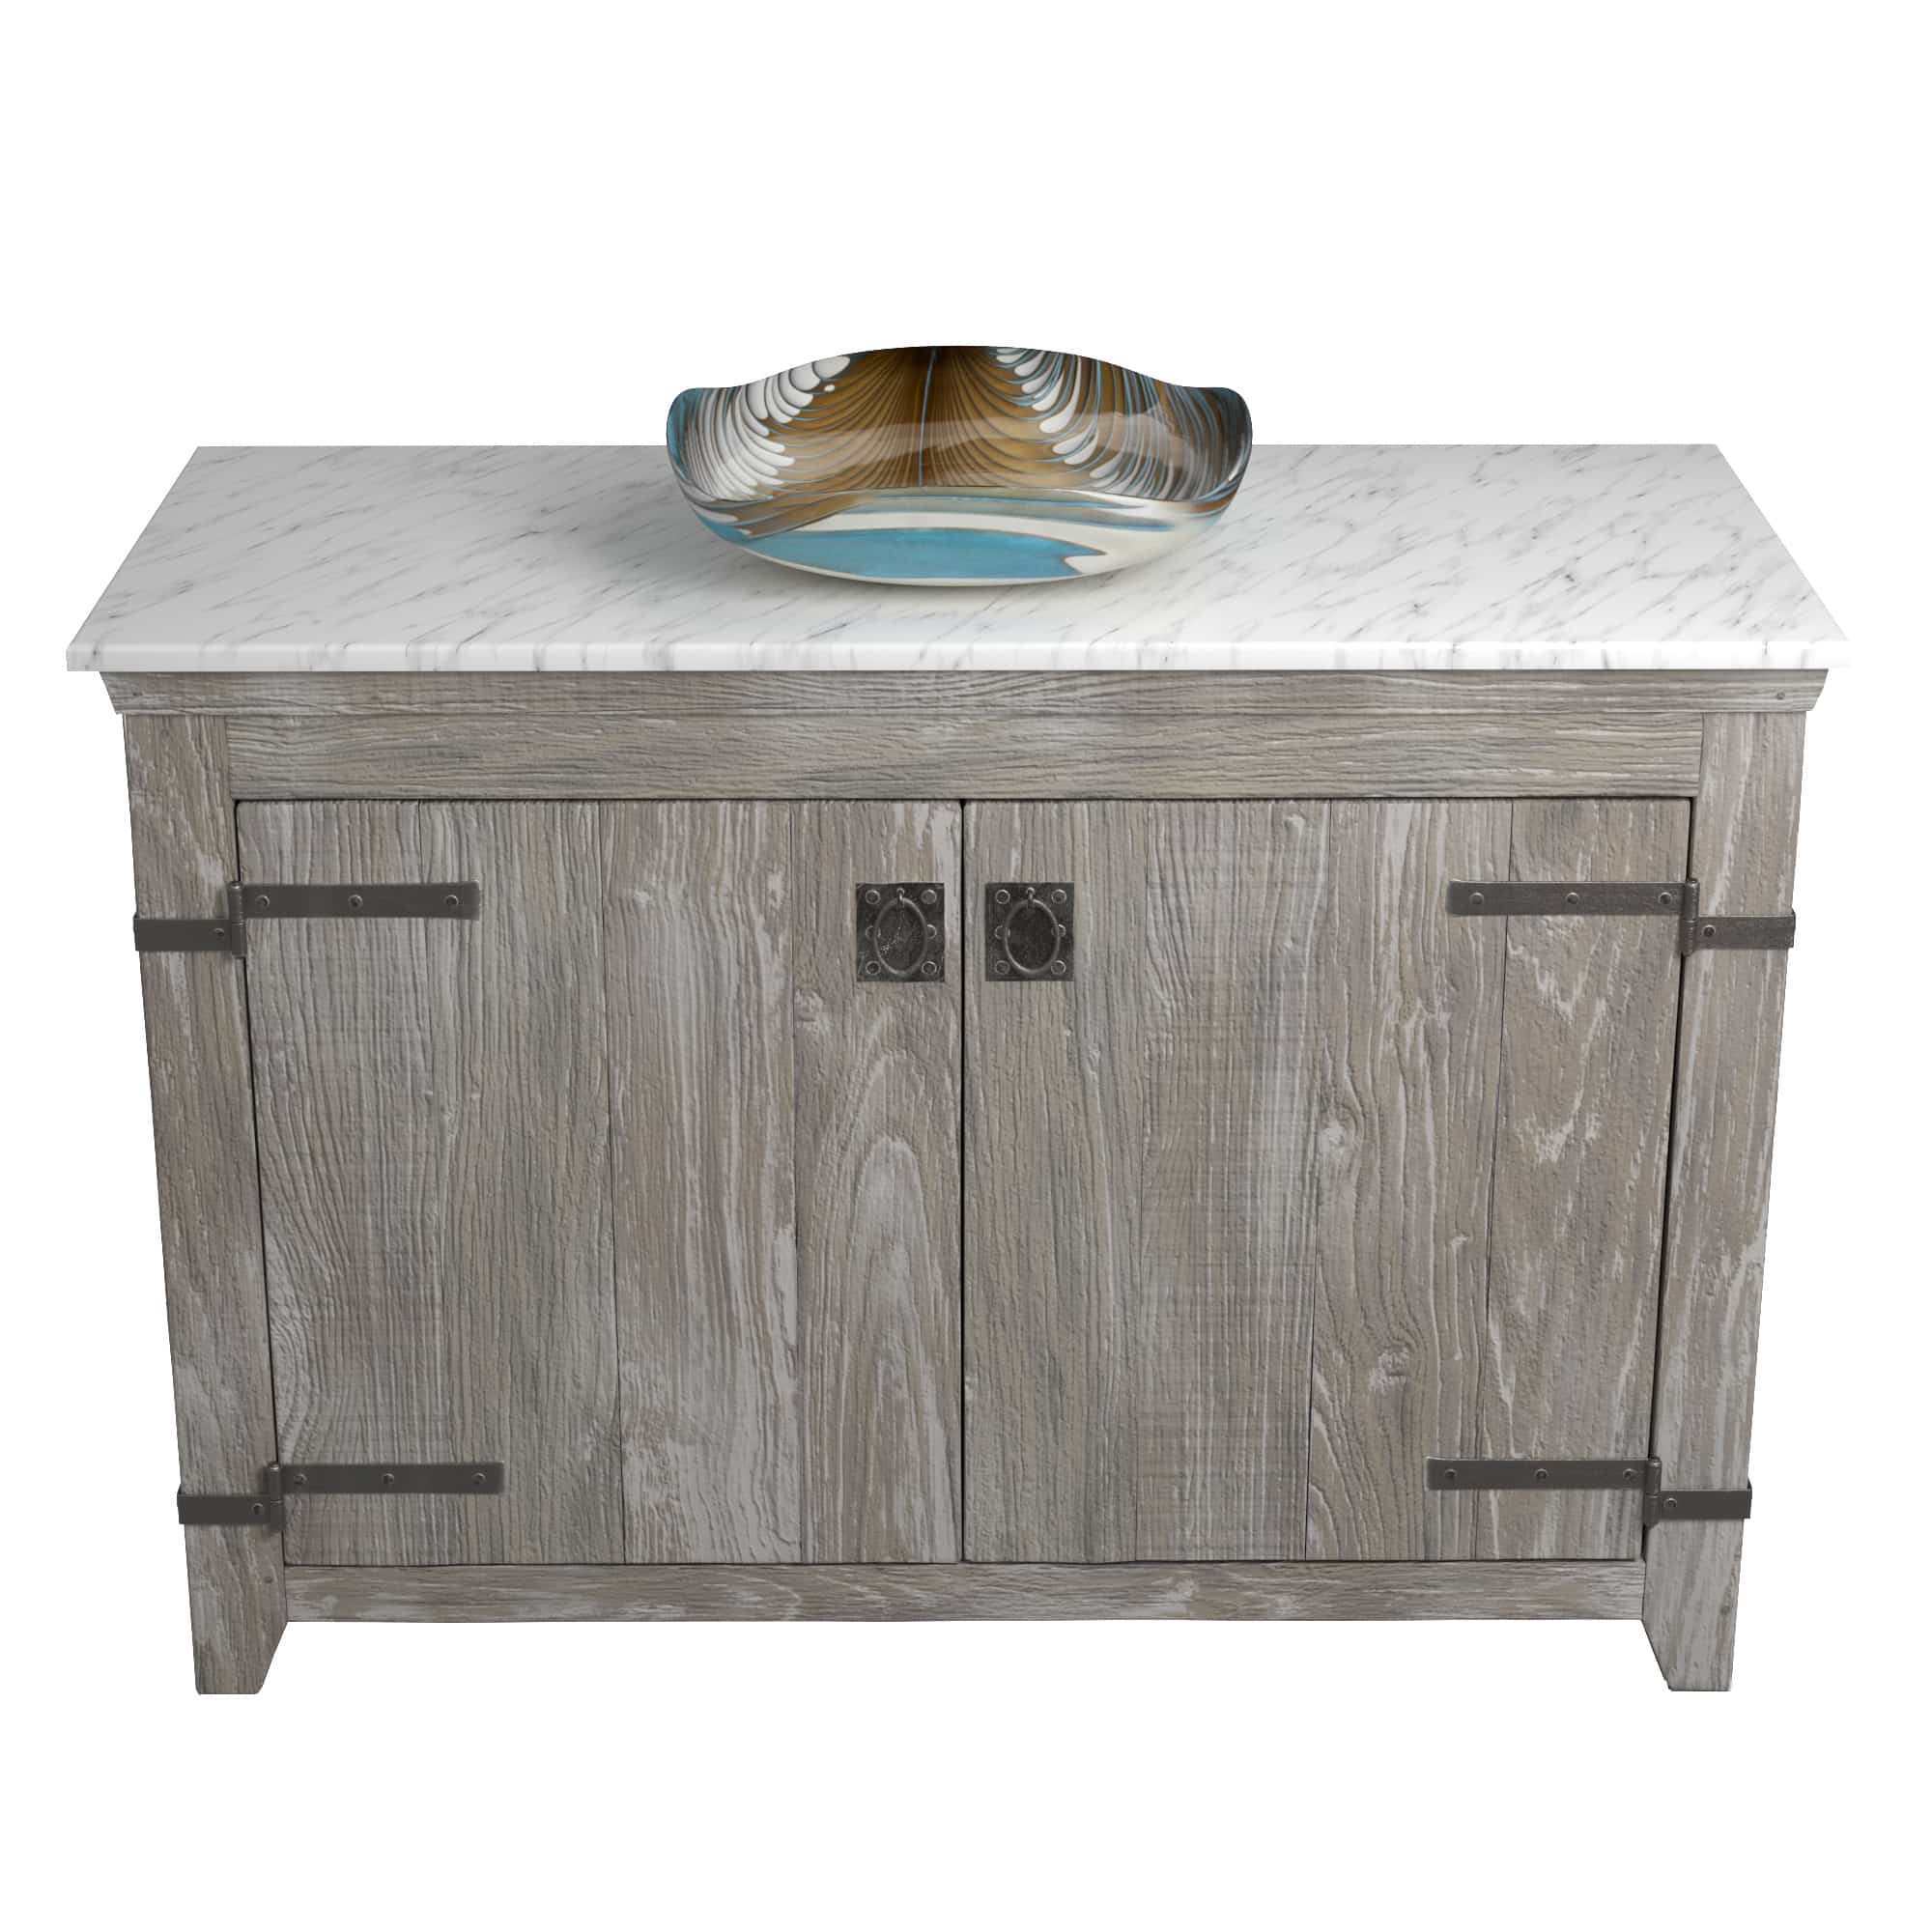 Native Trails 48" Americana Vanity in Driftwood with Carrara Marble Top and Lido in Shoreline, No Faucet Hole, BND48-VB-CT-MG-032